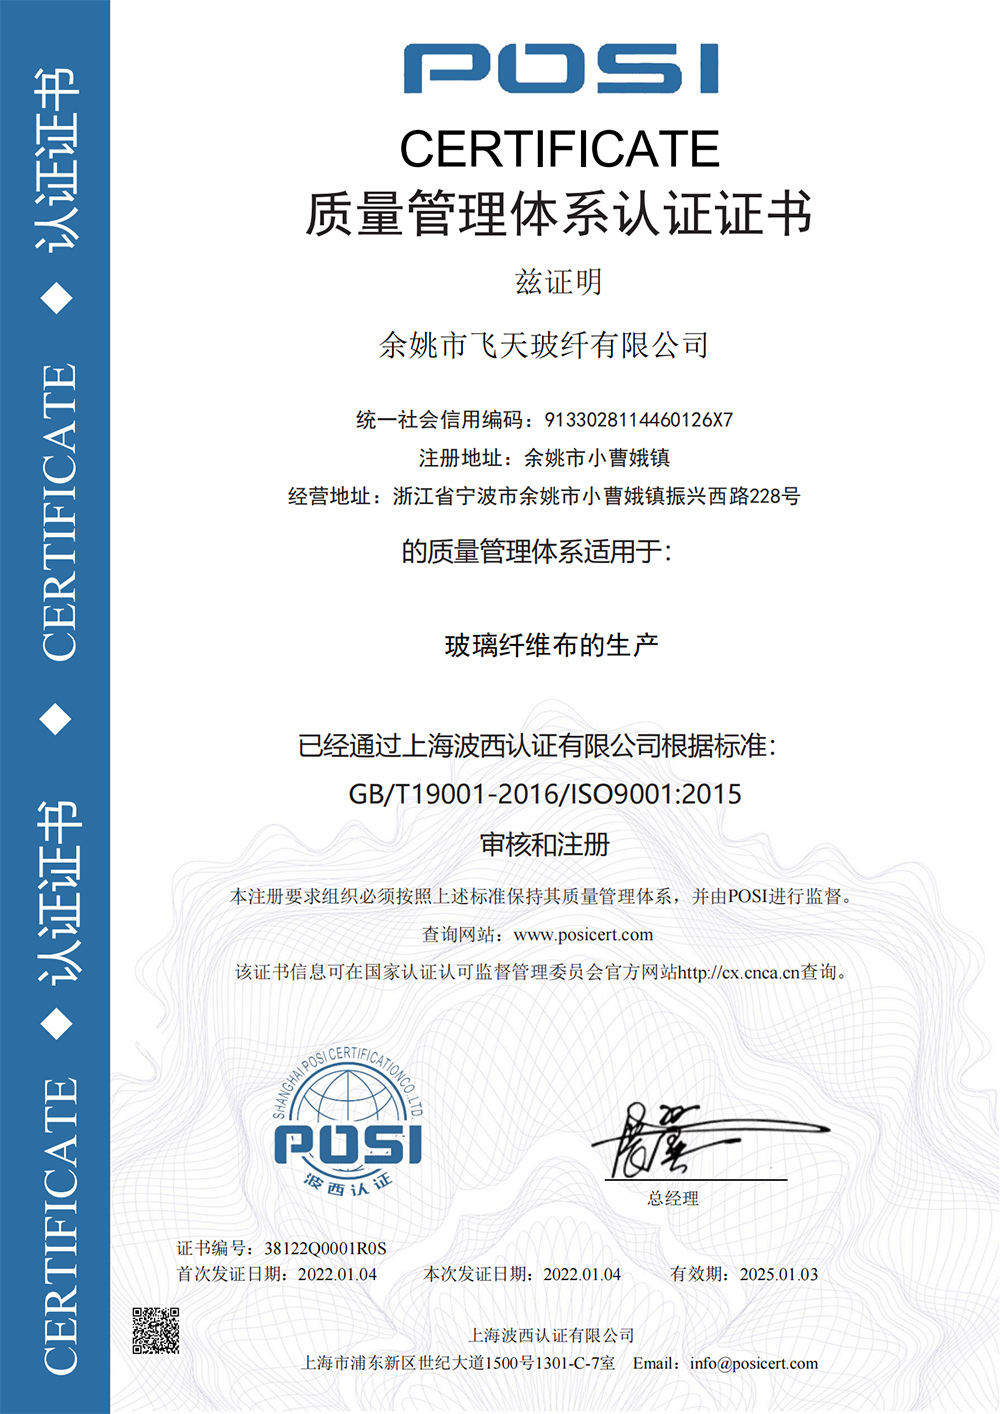 ISO certificate-6-01-2022_00